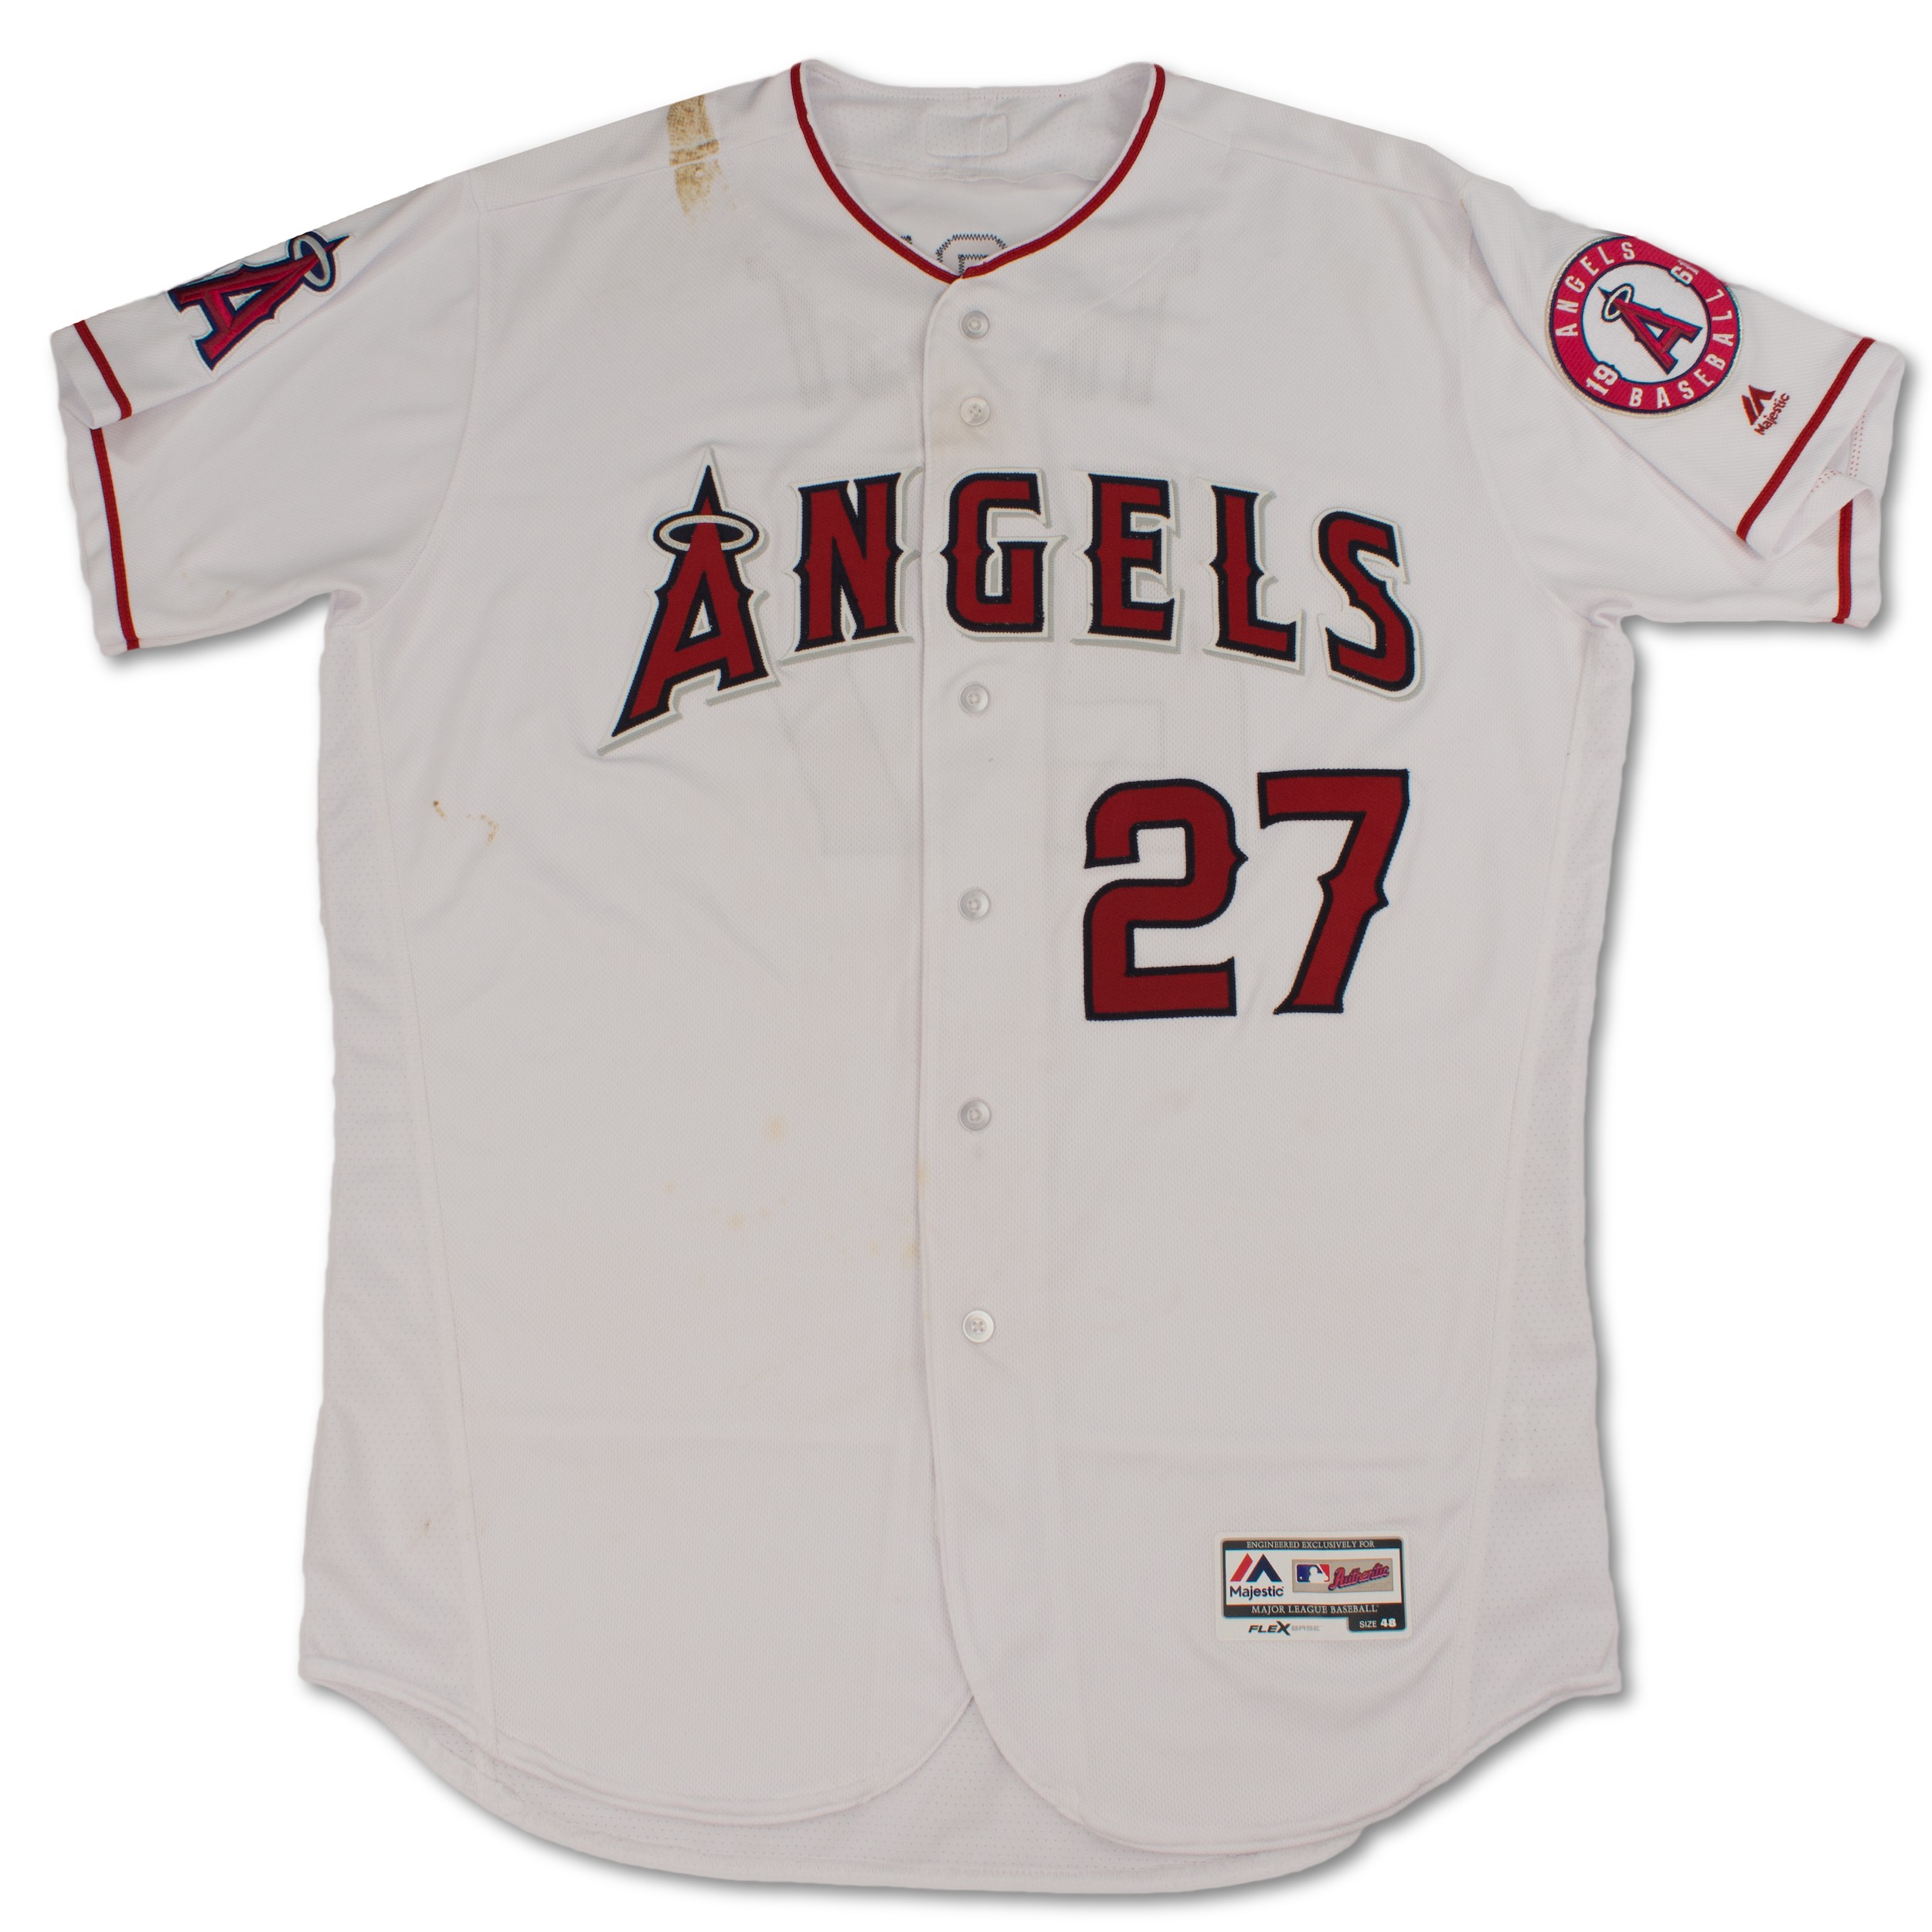 Angels Authentics: Mike Trout 2014 Opening Day Game-Used Jersey - Hologram  EK 821157